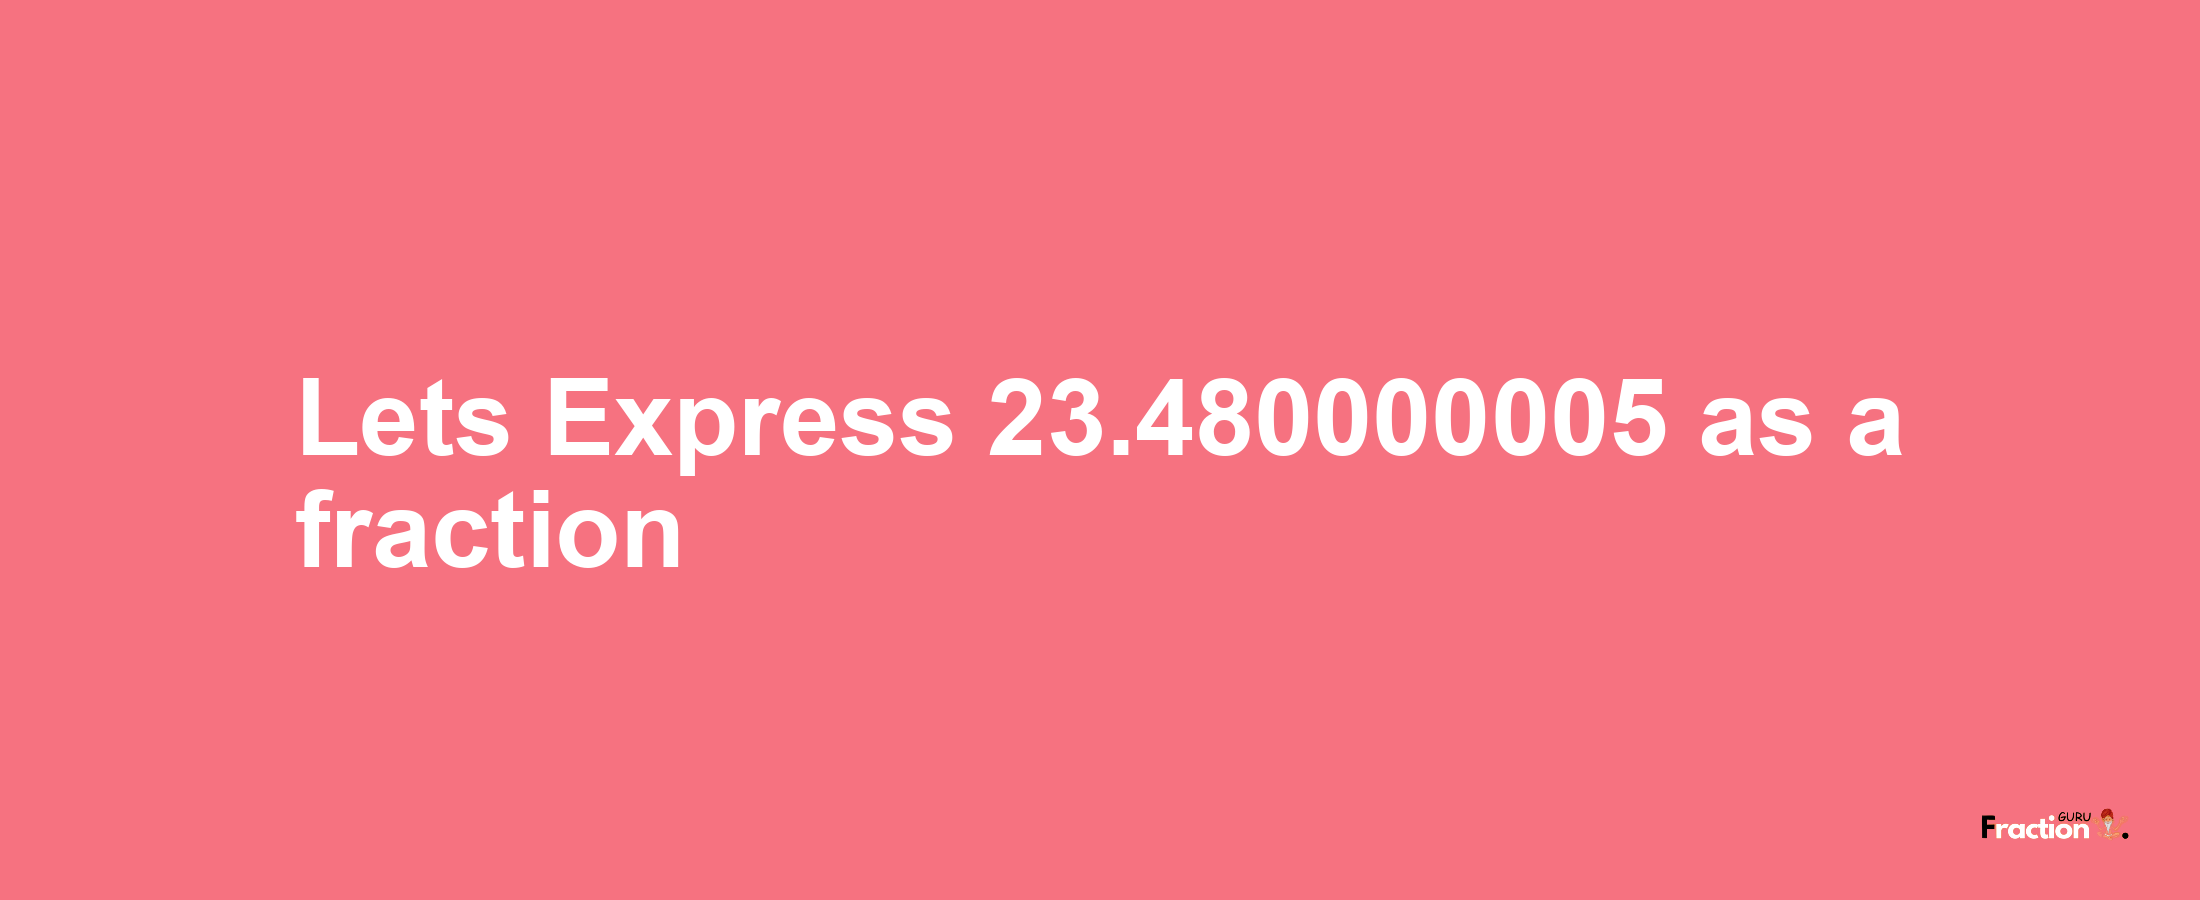 Lets Express 23.480000005 as afraction